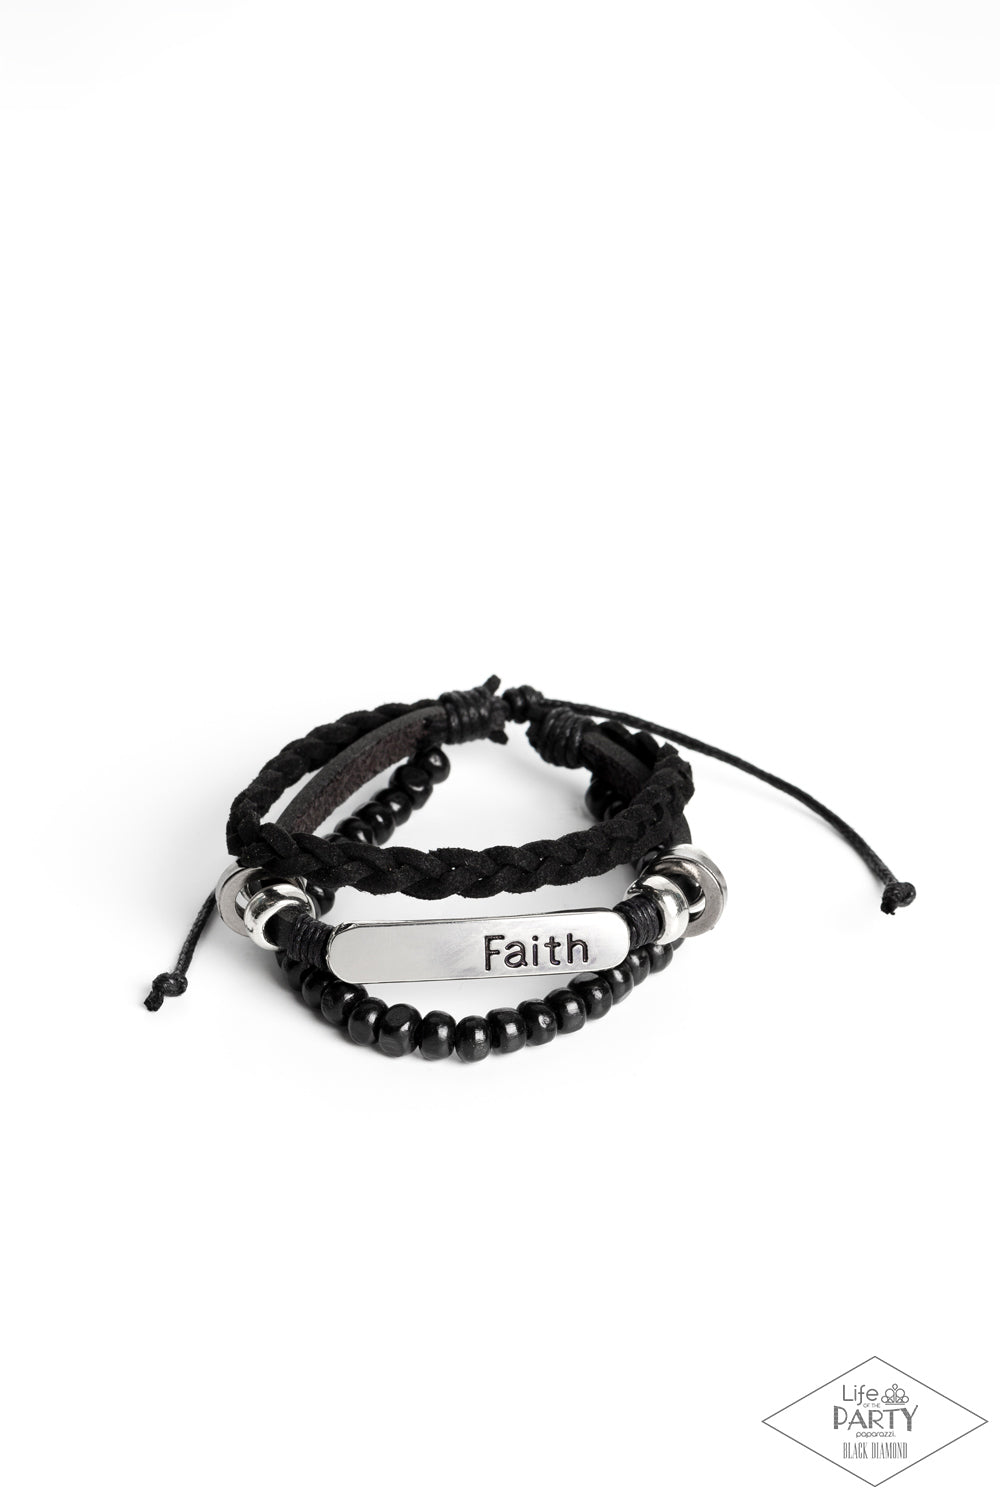 Let Faith Be Your Guide - Black